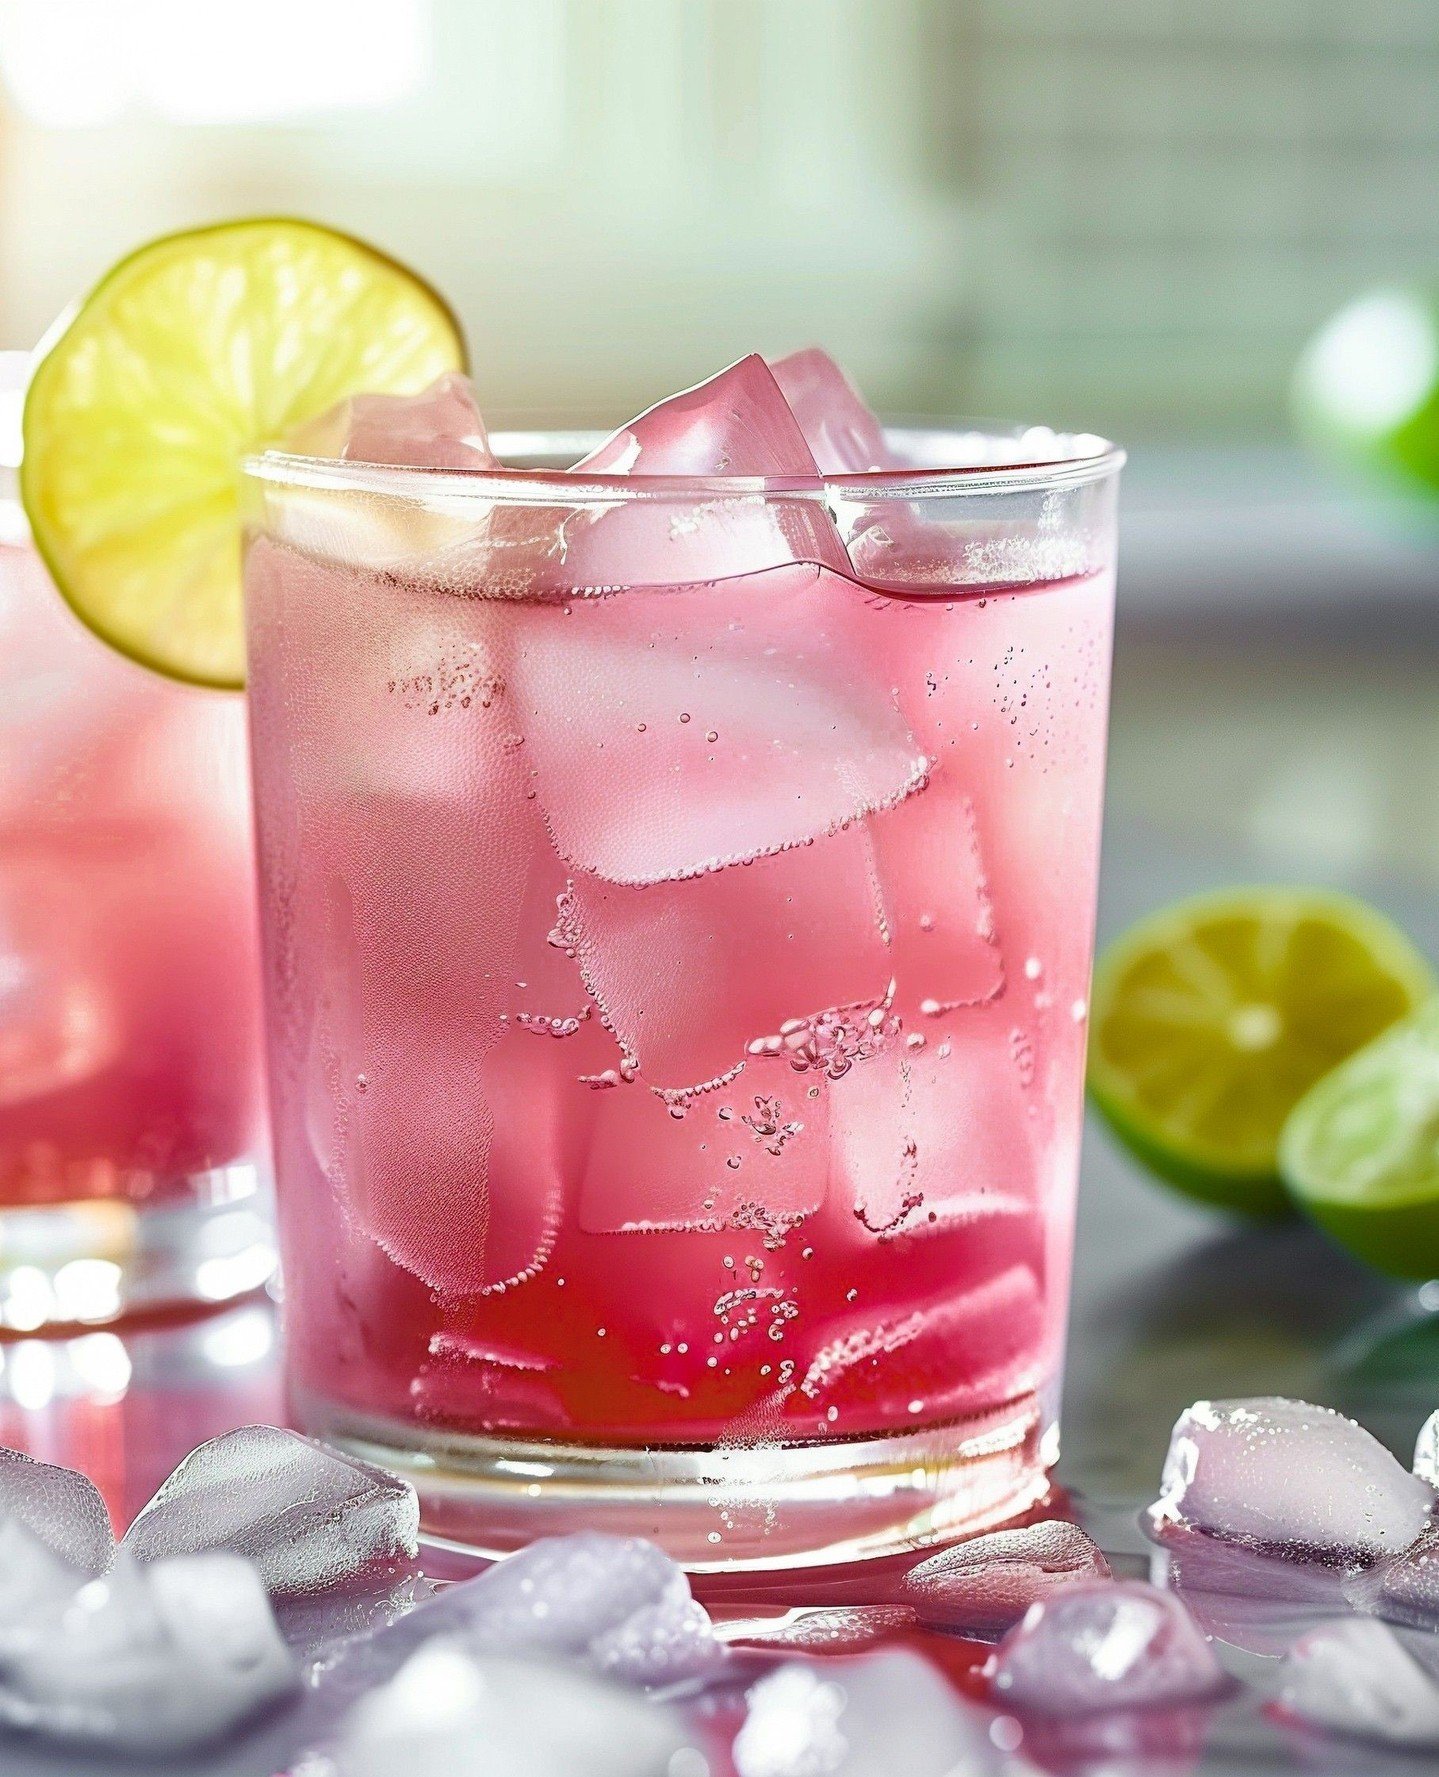 Celebrate all the Ladies this Oaks Day🌸 even if you are not celebrating @churchilldowns.⁠
Sip on a Lily cocktail, a refreshing cocktail made with vodka, orange liqueur, cranberry juice and a lemon or lime wedge. ⁠
⁠
Comment DRINK for recipe⁠